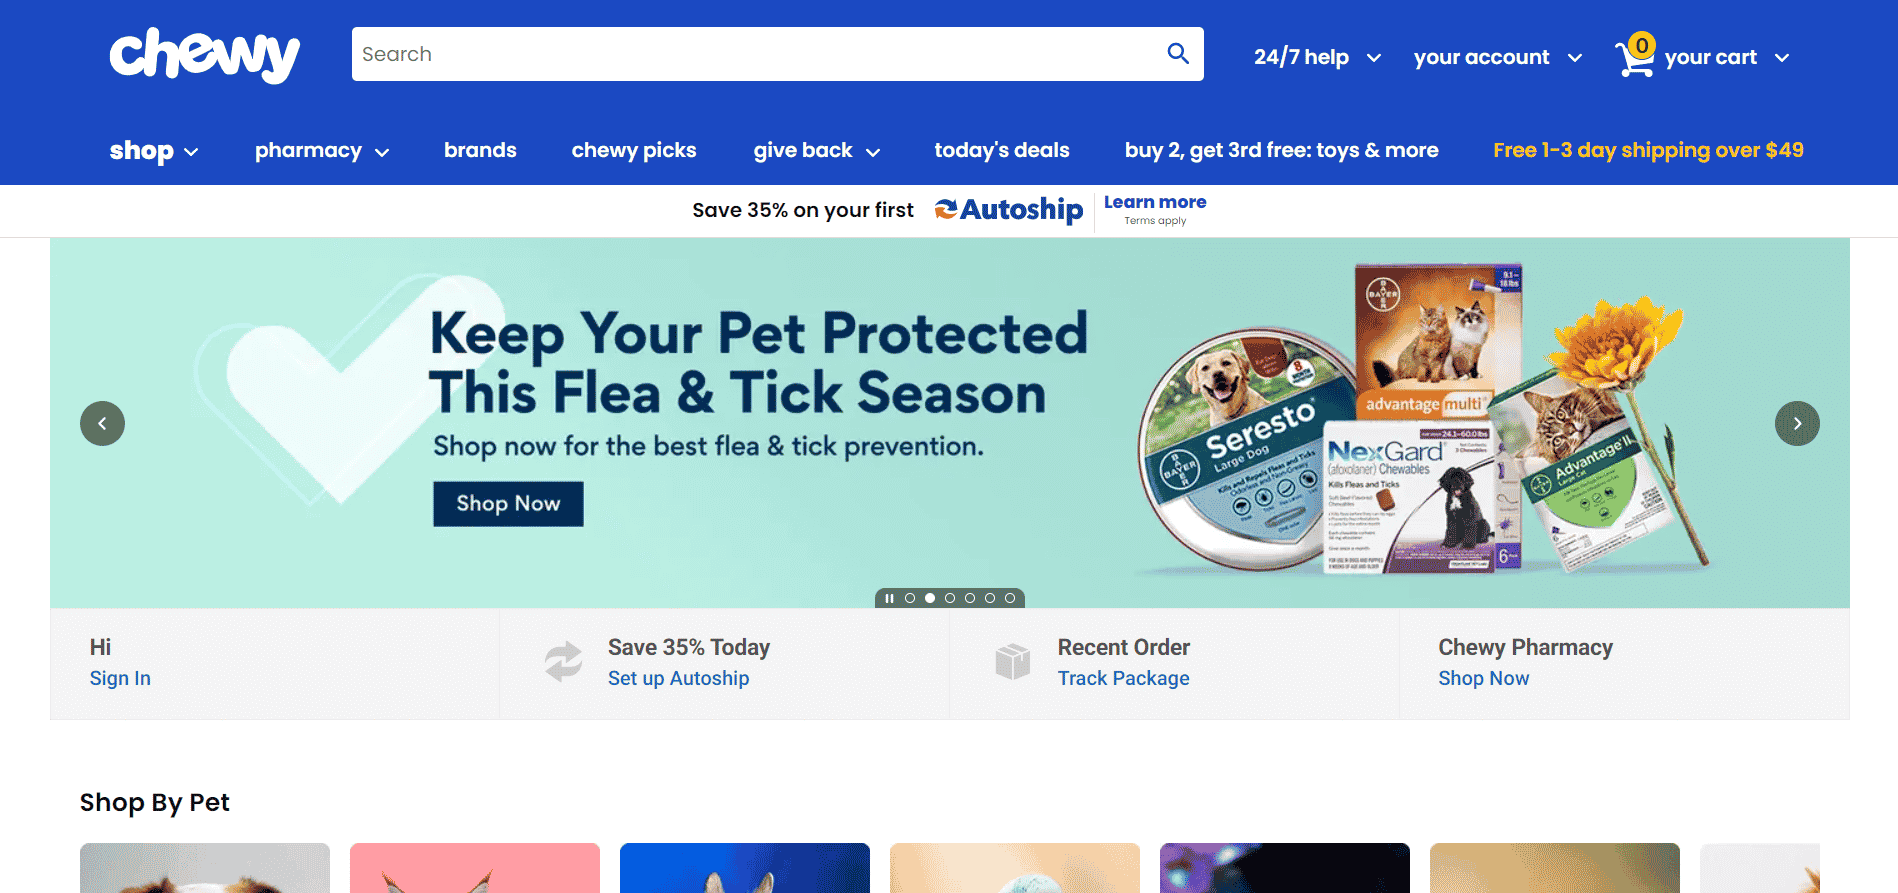 Official website of Chewy pet brand